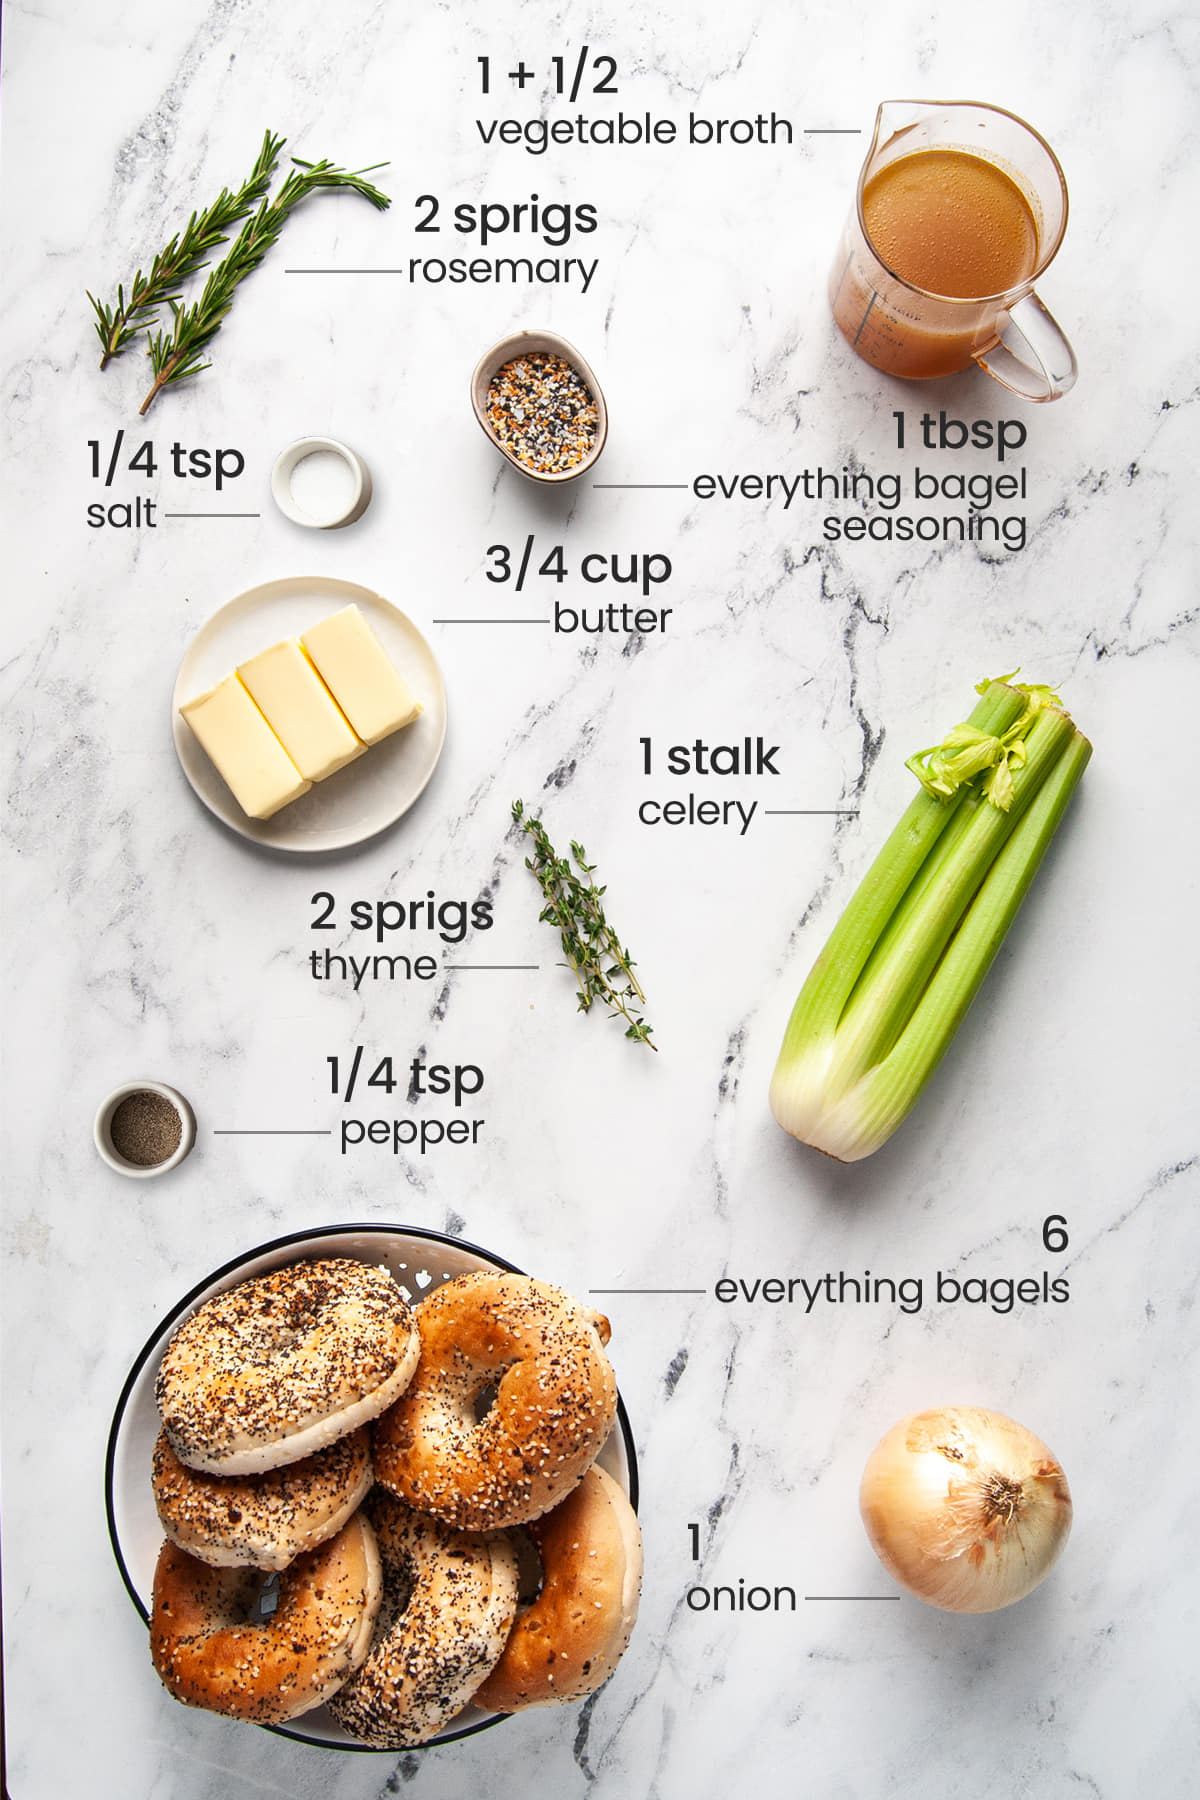 All ingredients for Everything Bagel Stuffing - Rosemary, everything seasoning, veggie broth, butter, thyme, celery, bagels, salt, pepper, and an onion